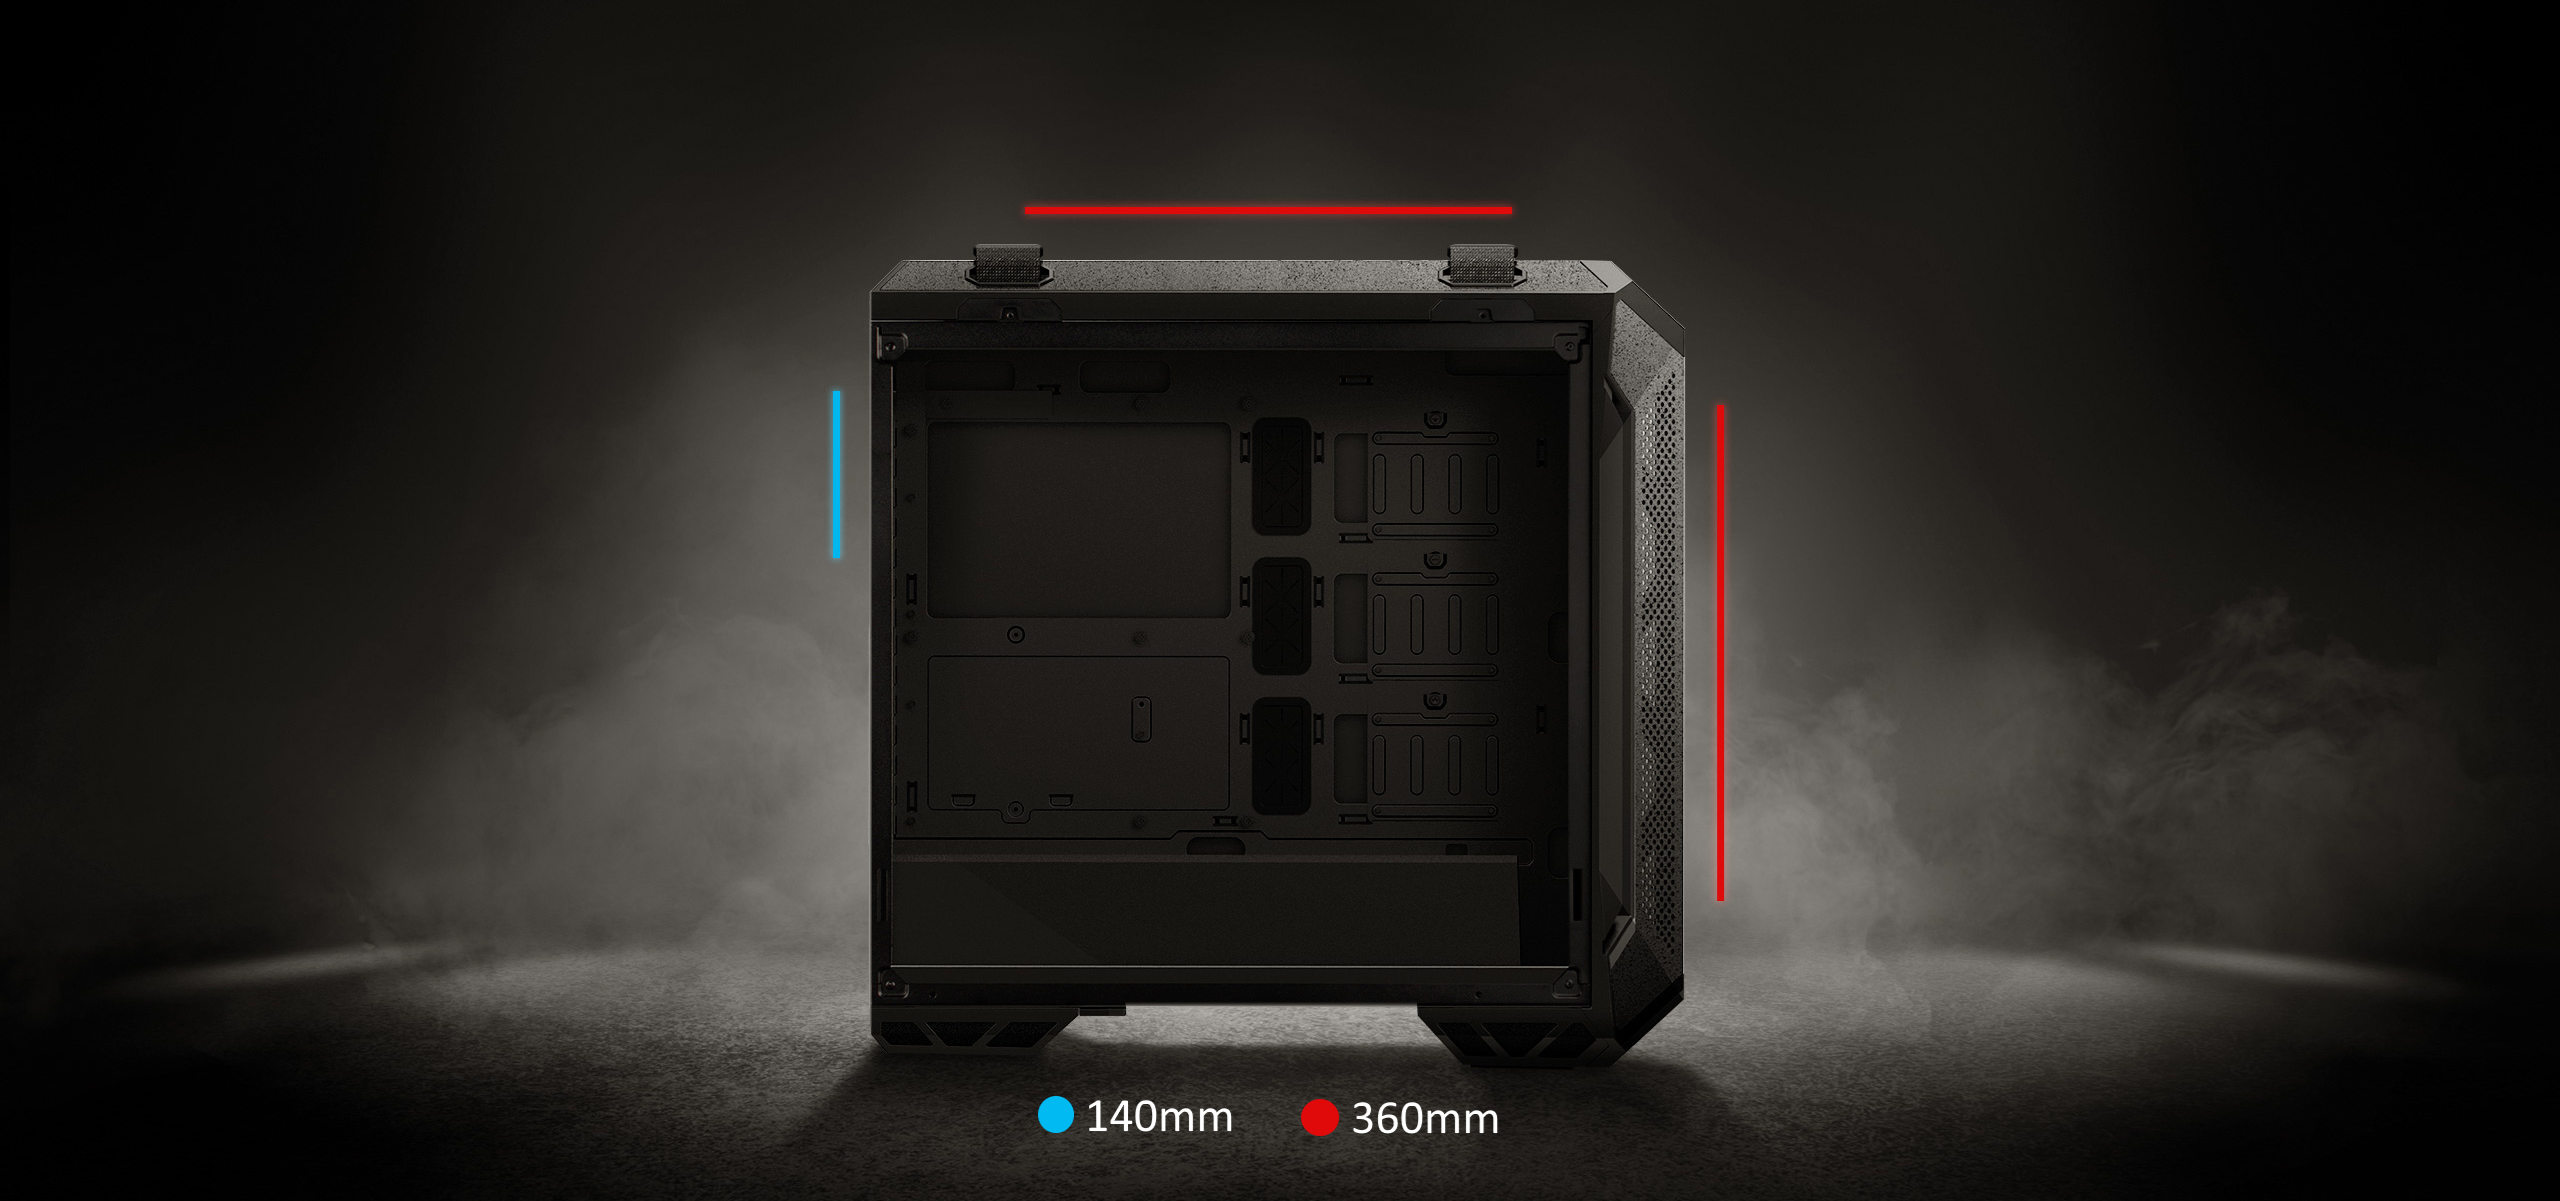 ASUS TUF Gaming GT501 Mid-Tower Computer Case for up to EATX Motherboards  with USB 3.0 Front Panel, Smoked Tempered Glass, Steel Construction, and  Four Case Fans (GT501 TUF GAMING CASE/GRY/WITH HANDL) 